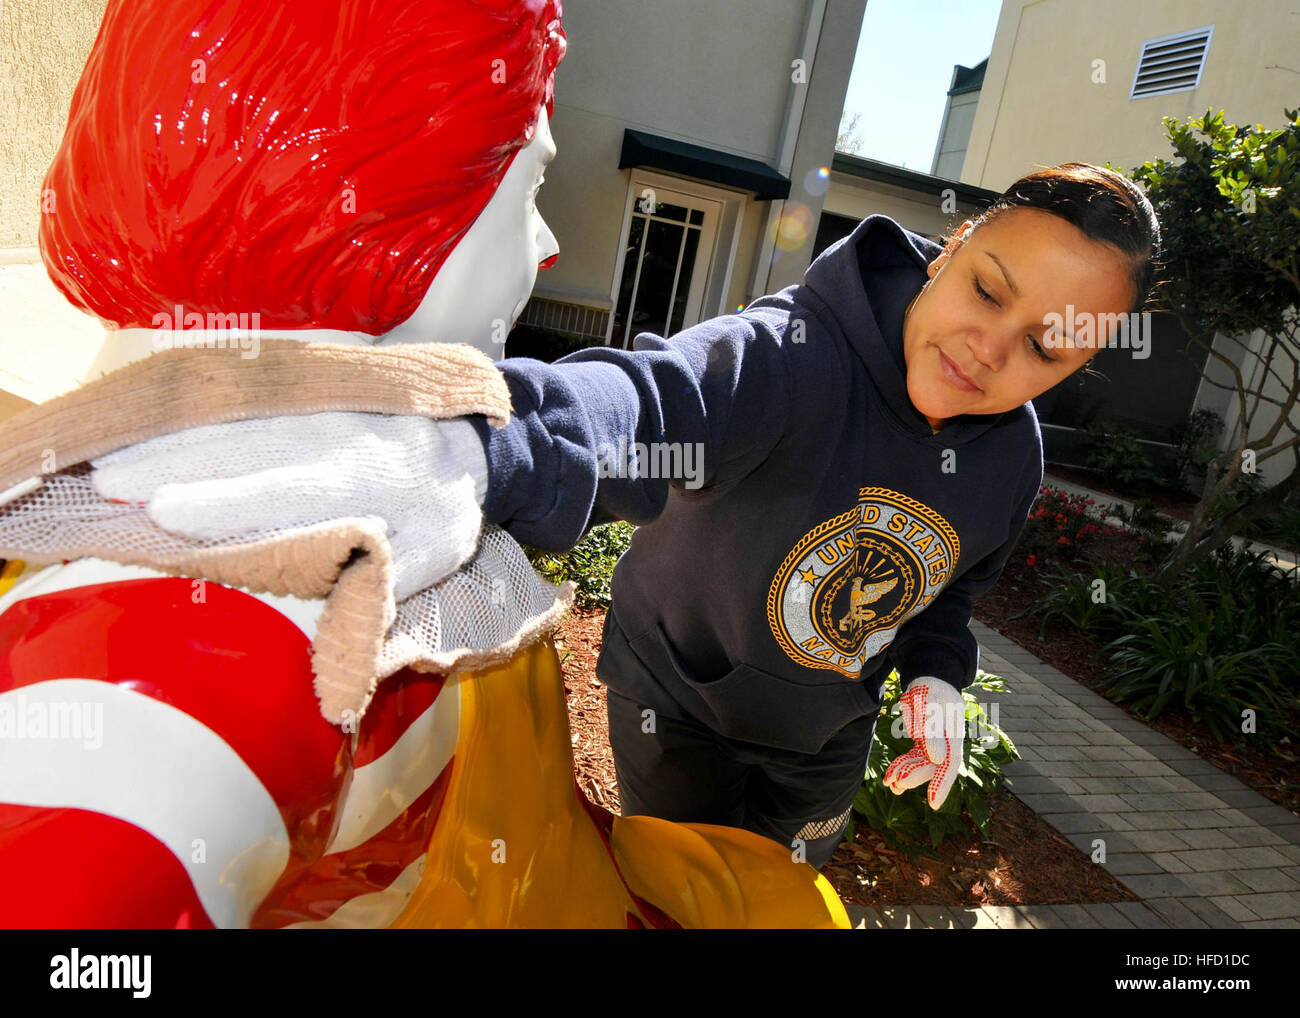 JACKSONVILLE, Fla. (Feb. 28, 2013) Chief Legalman Lucia Abreu cleans a statue of Ronald McDonald during a Commander, Navy Region Southeast  volunteer project at the Ronald McDonald House in Jacksonville, Fla. The project was co-sponsored by the Commander, Navy Region Southeast Chief Petty Officers Association and the Commander, Navy Region Southeast First Class Petty Officers Association. (U.S. Navy photo by Mass Communication Specialist 1st Class Greg Johnson/Released) 130228-N-UA460-253 Join the conversation http://www.facebook.com/USNavy http://www.twitter.com/USNavy http://navylive.dodlive Stock Photo